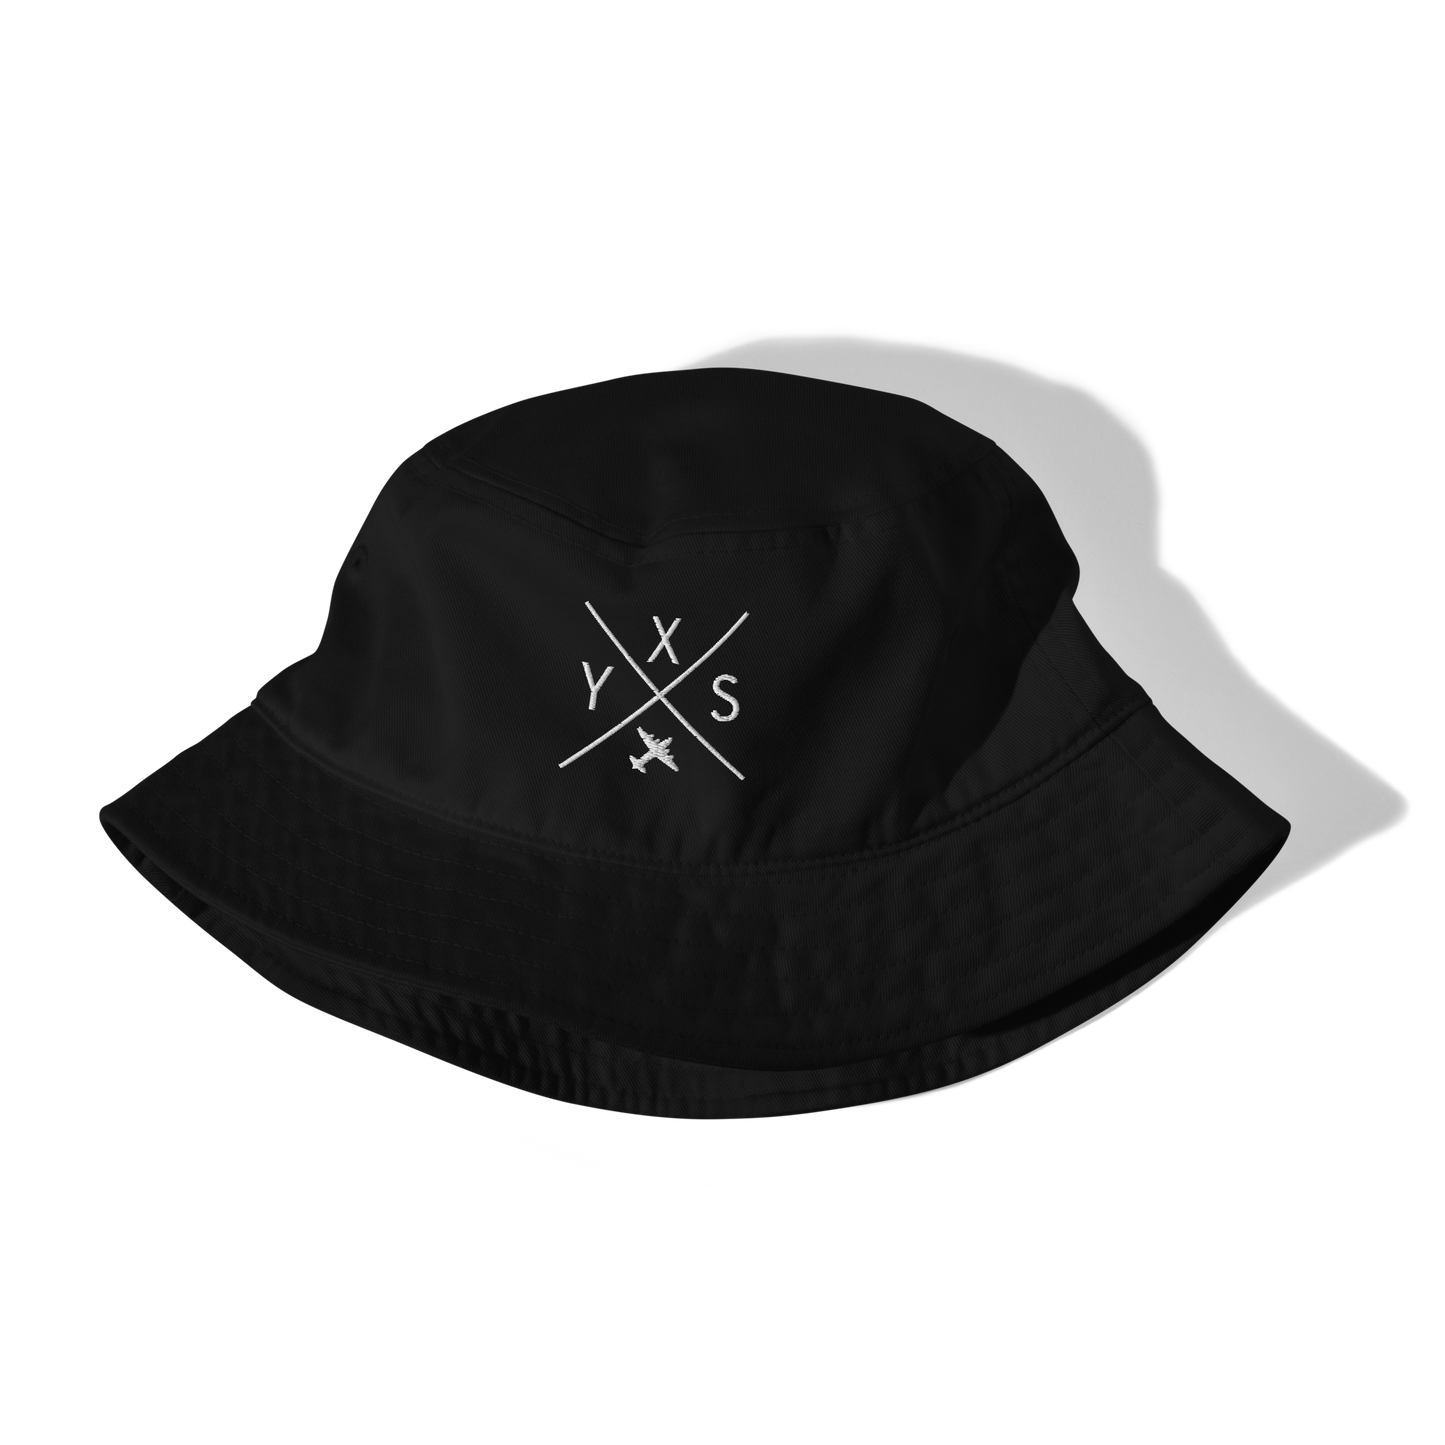 YHM Designs - YXU London Organic Cotton Bucket Hat - Crossed-X Design with Airport Code and Vintage Propliner - White Embroidery - Image 02